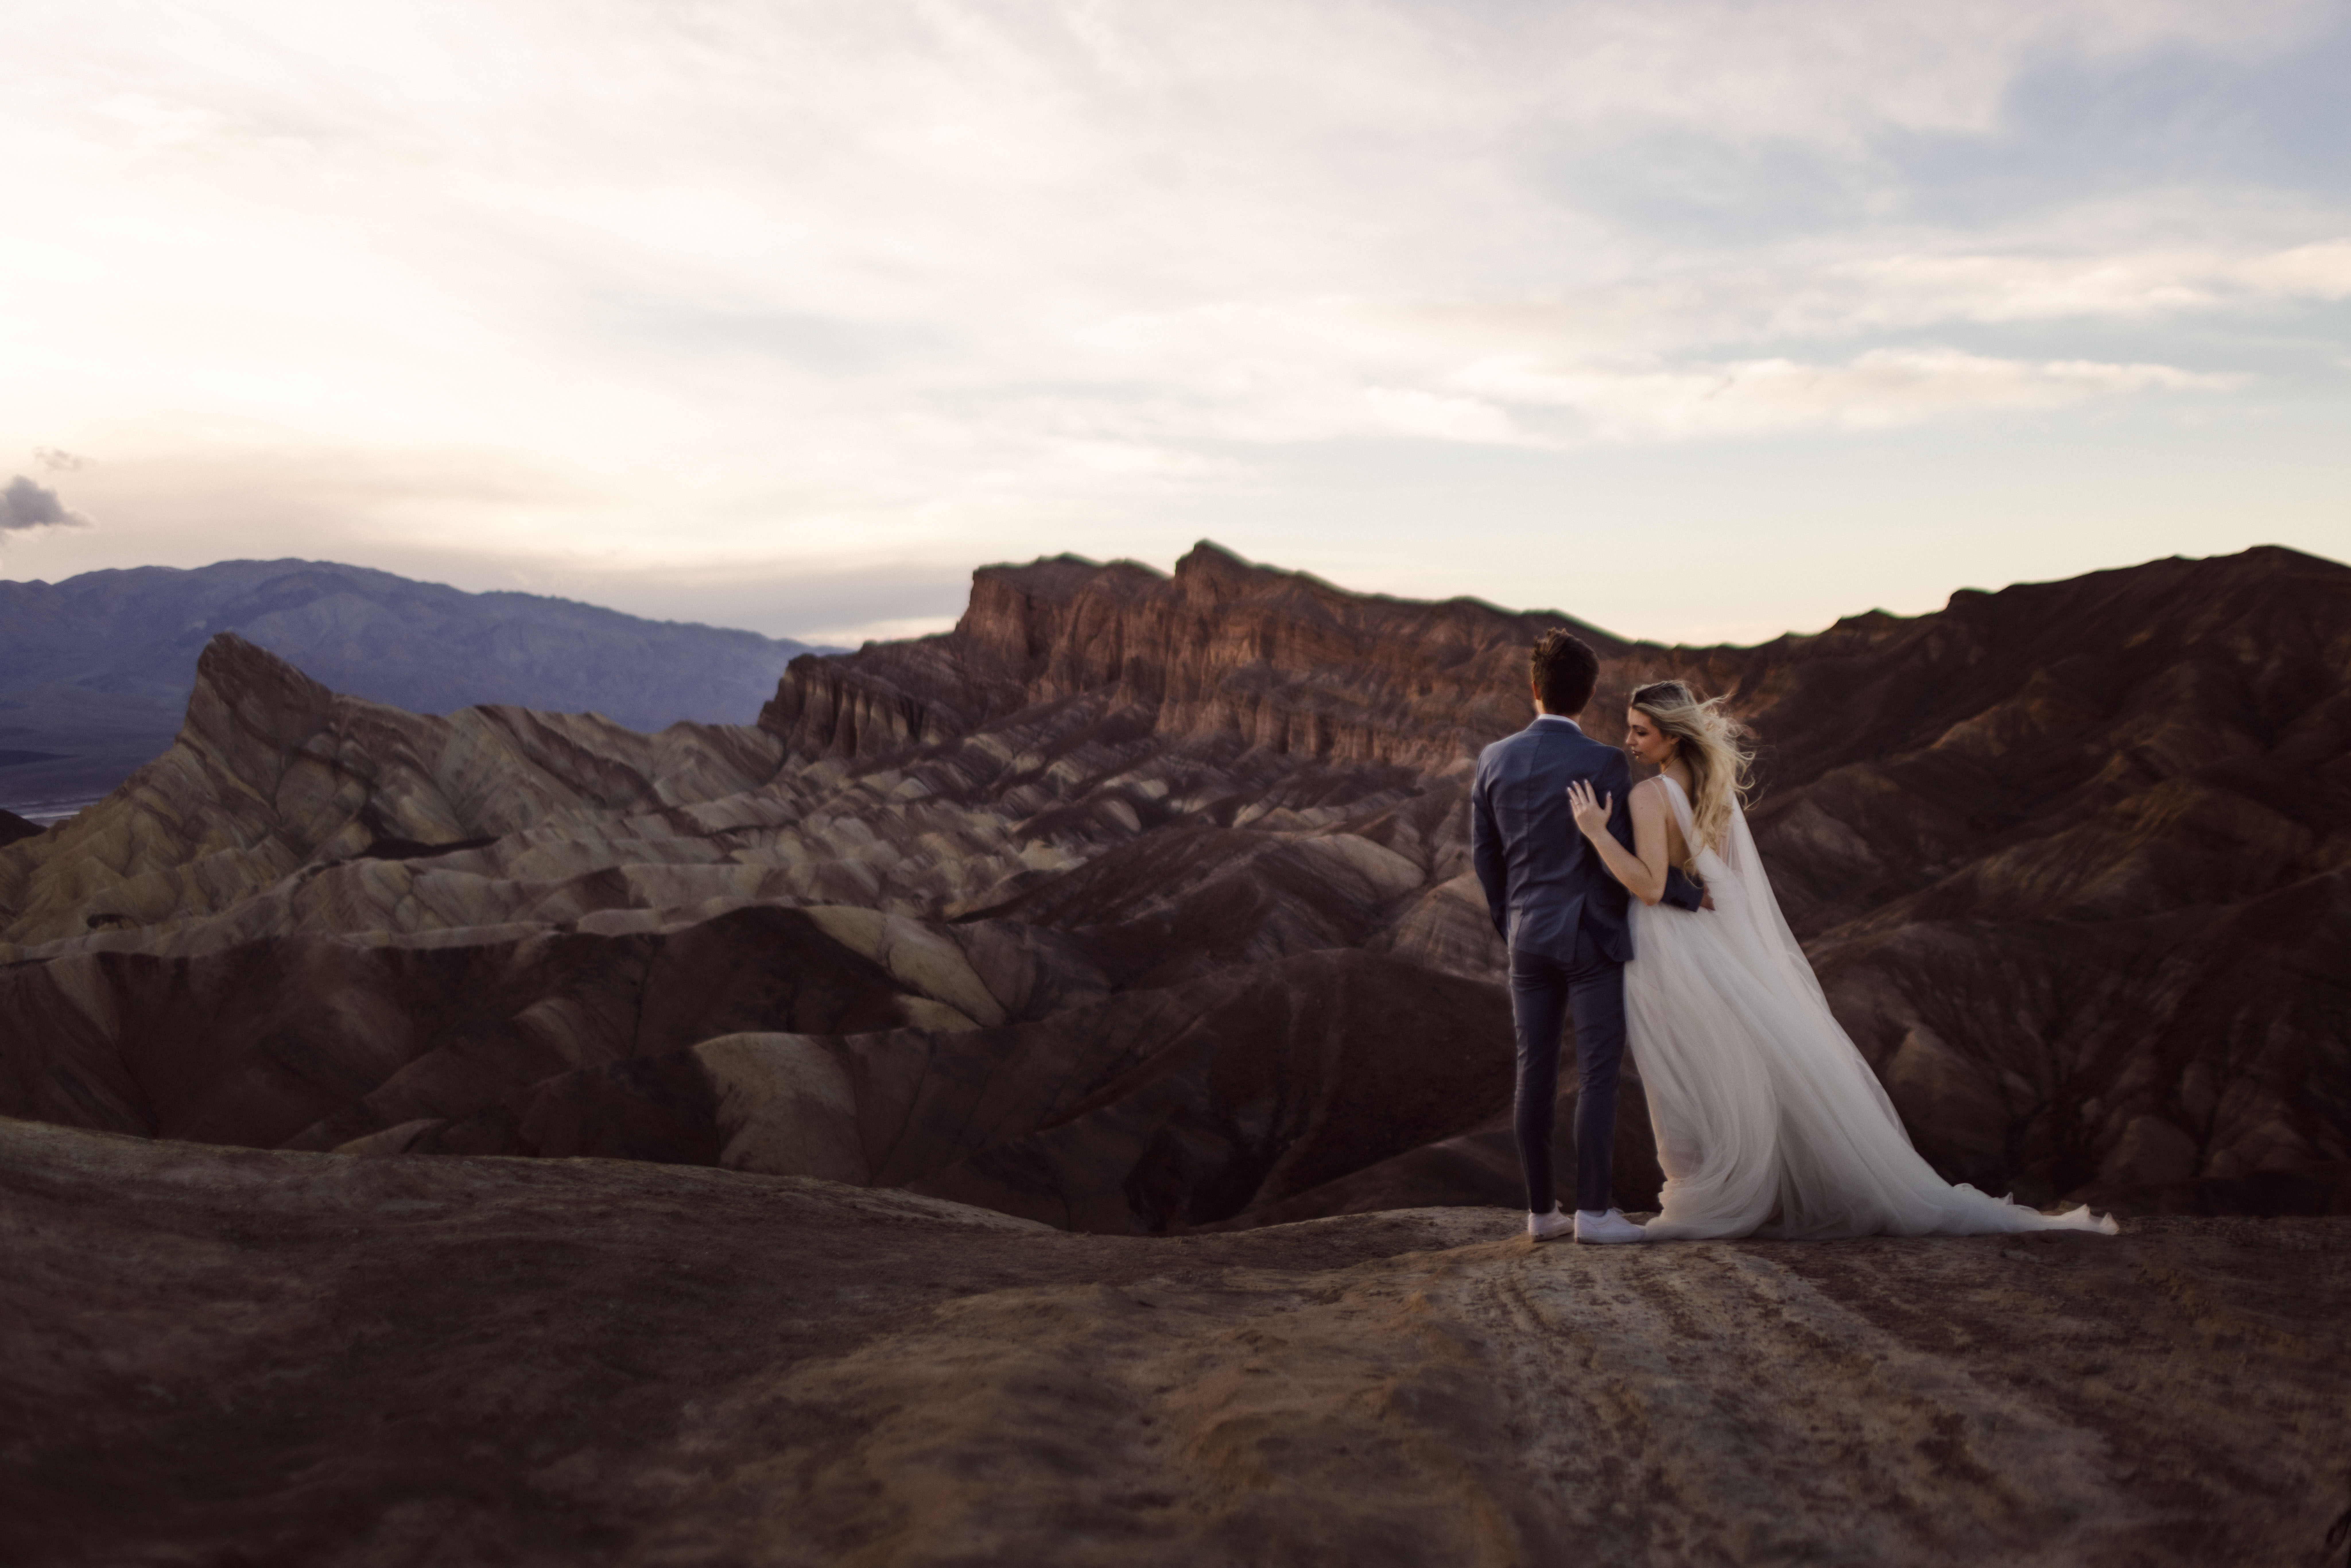 An image captured by a Colorado elopement photographer.